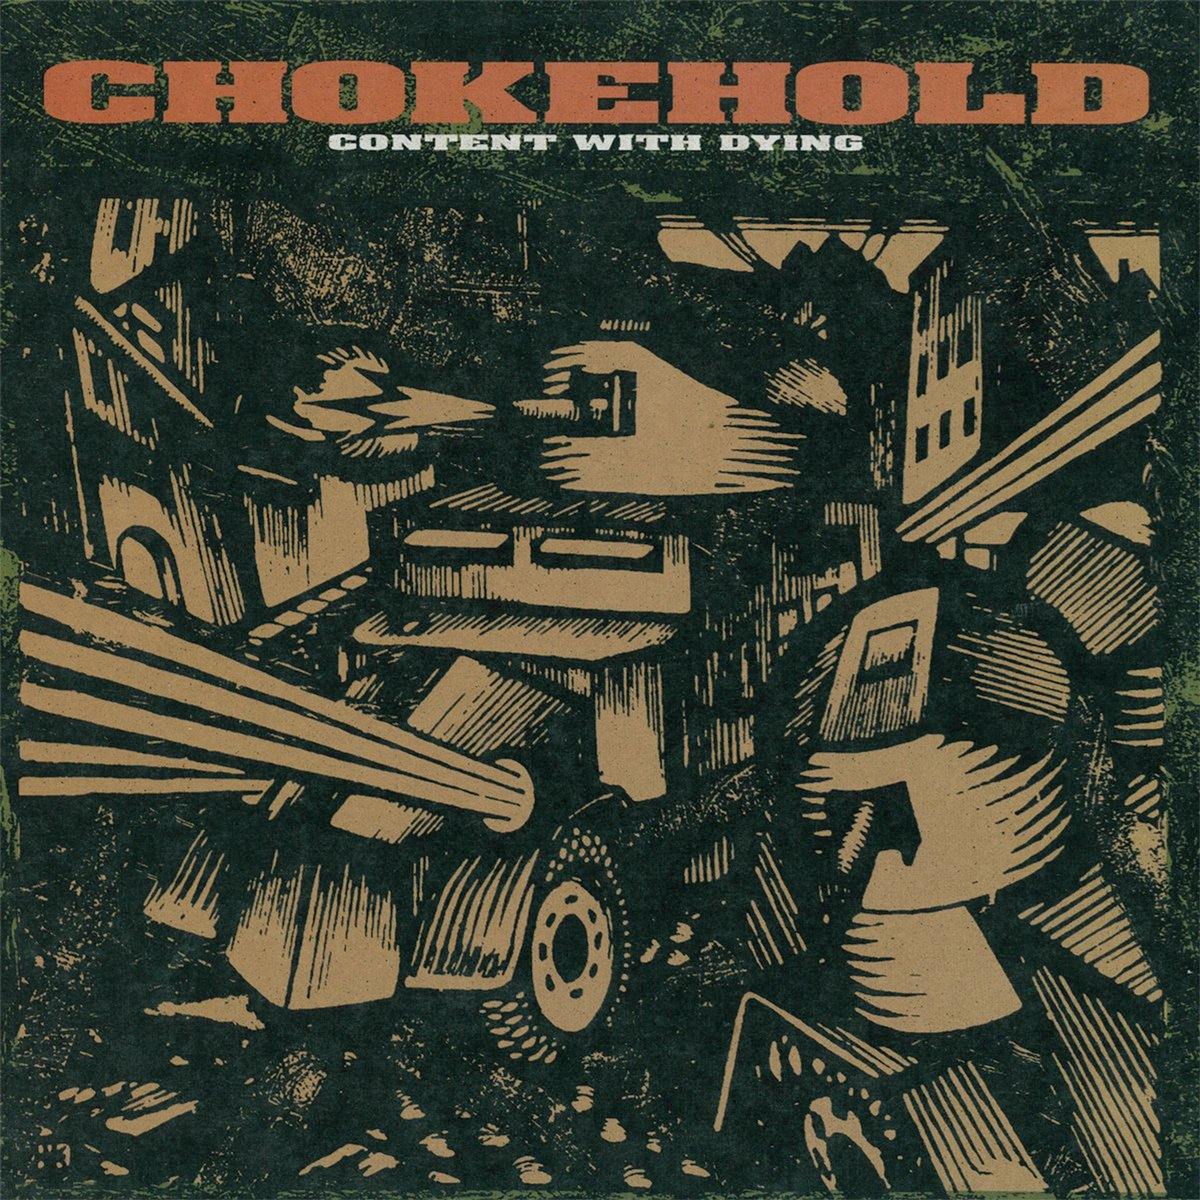 Buy – Chokehold "Content With Dying" 12" – Band & Music Merch – Cold Cuts Merch